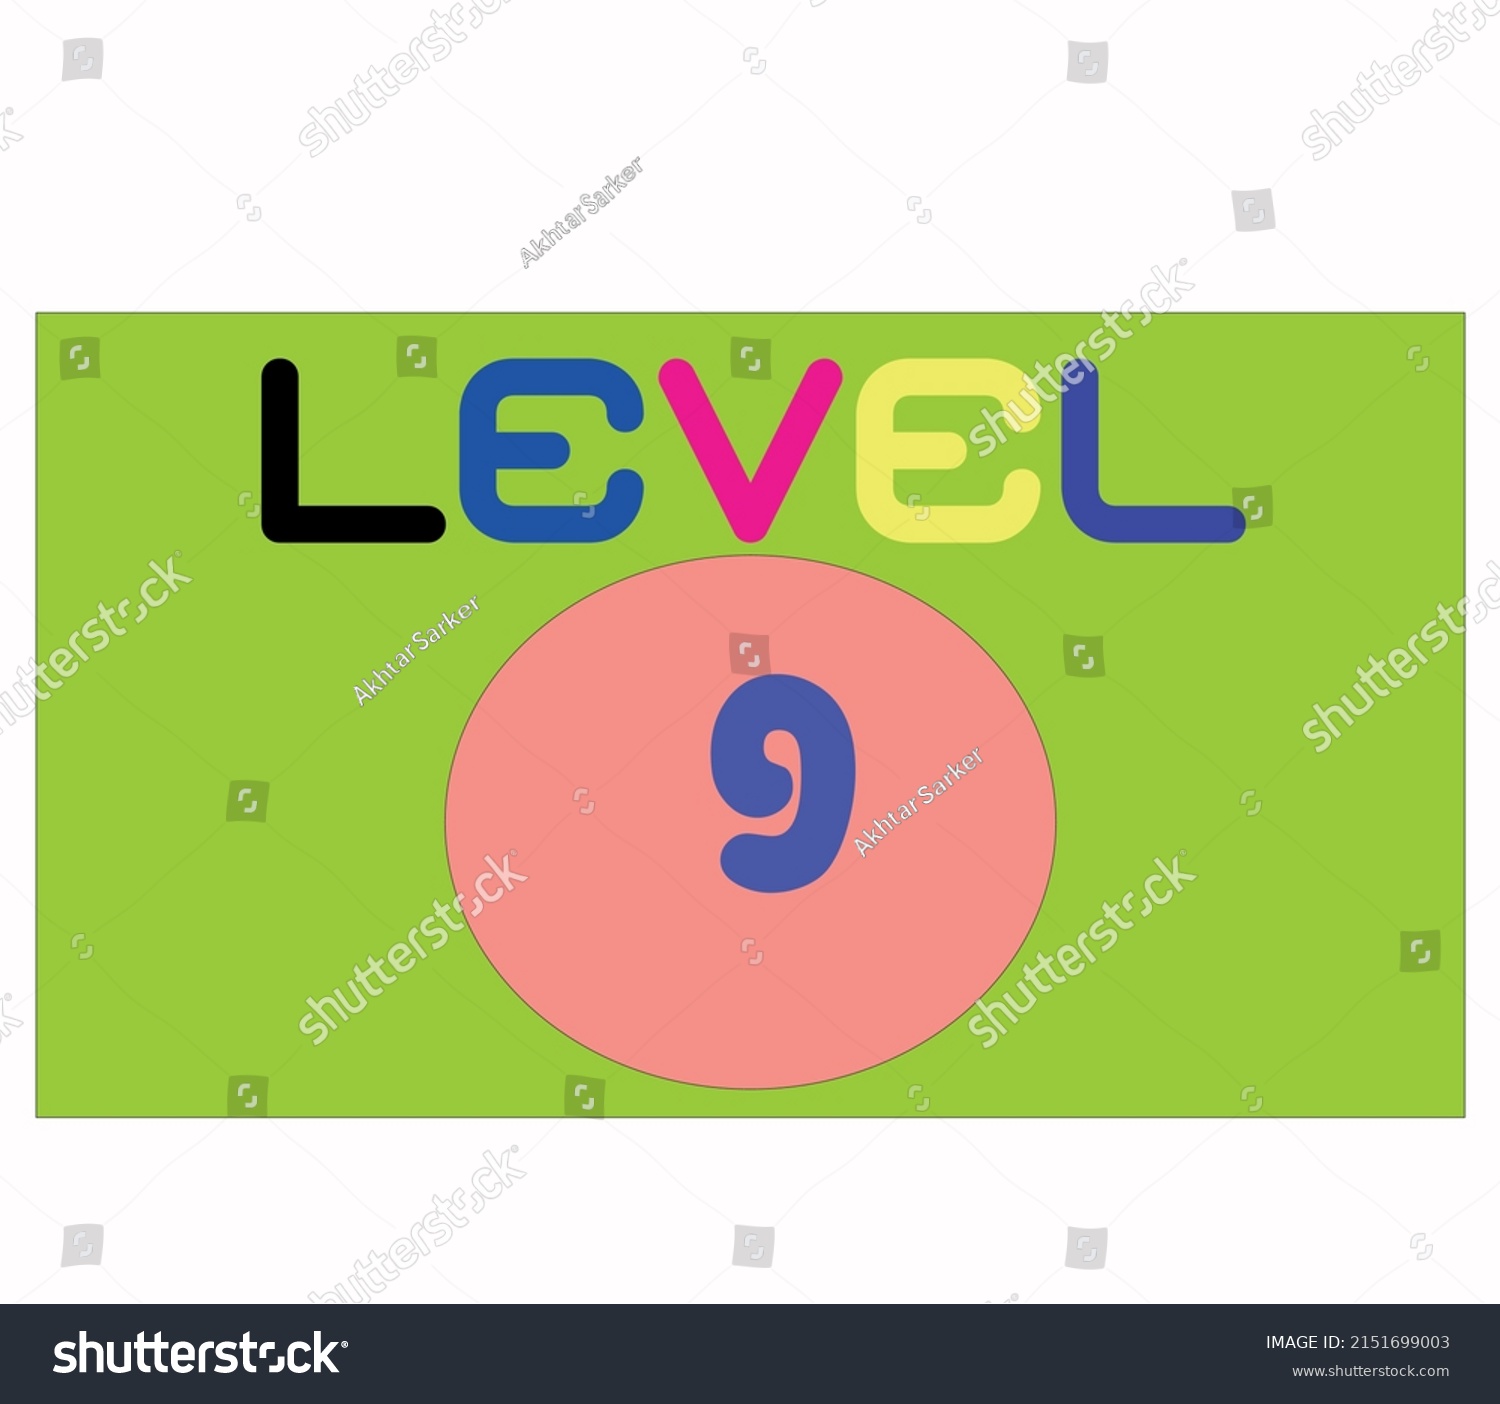 Level 9 sign in isolated on white background #2151699003